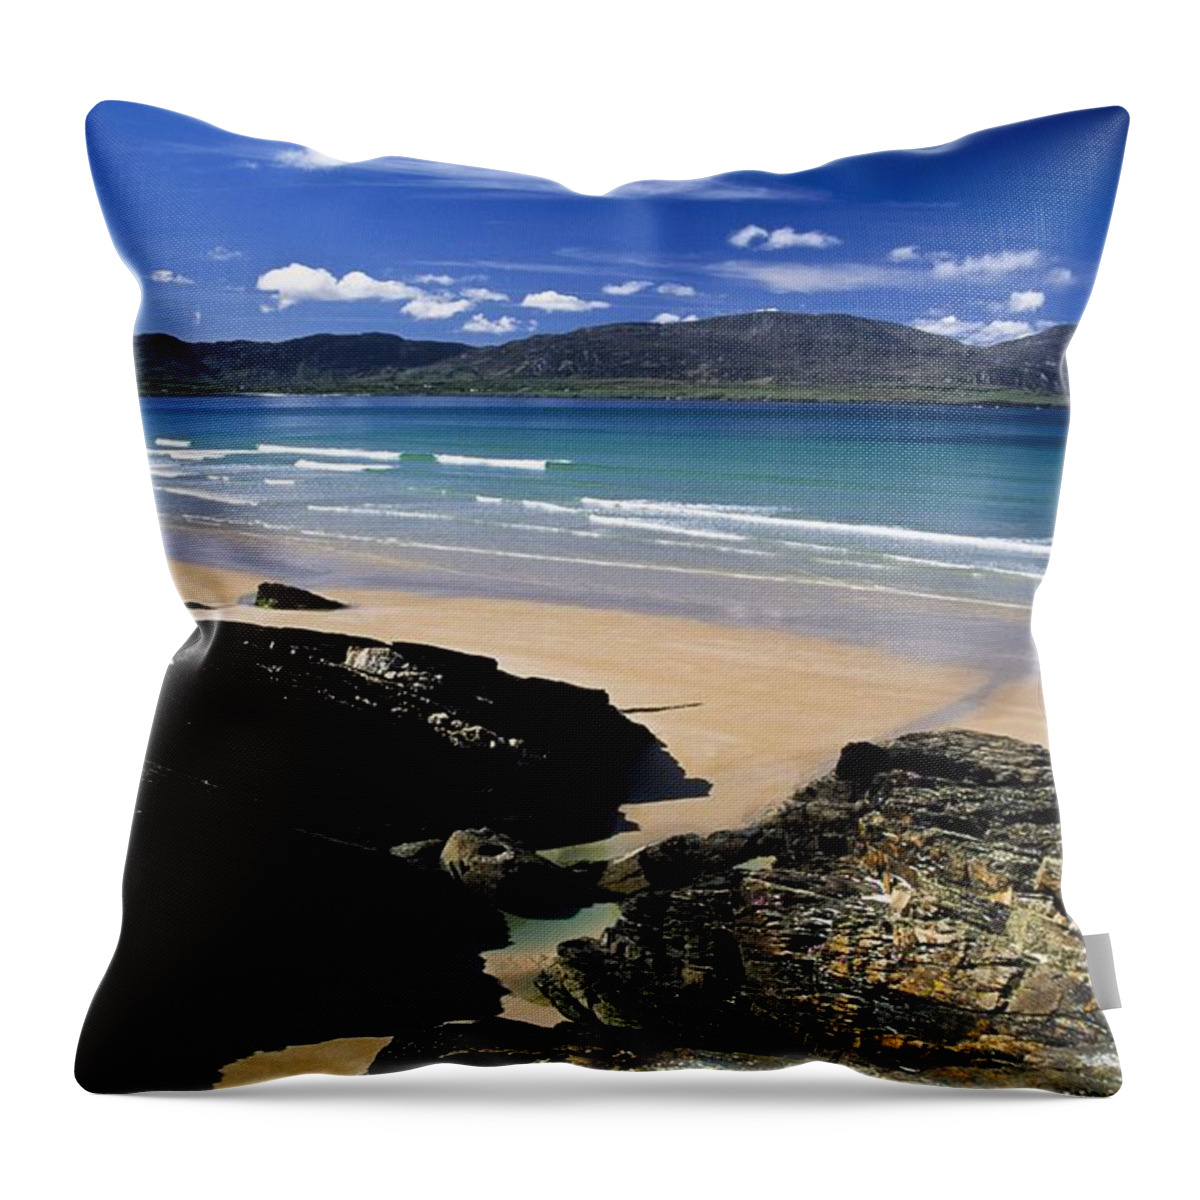 Bay Throw Pillow featuring the photograph Tramore Strand And Loughros Mor Bay by Gareth McCormack